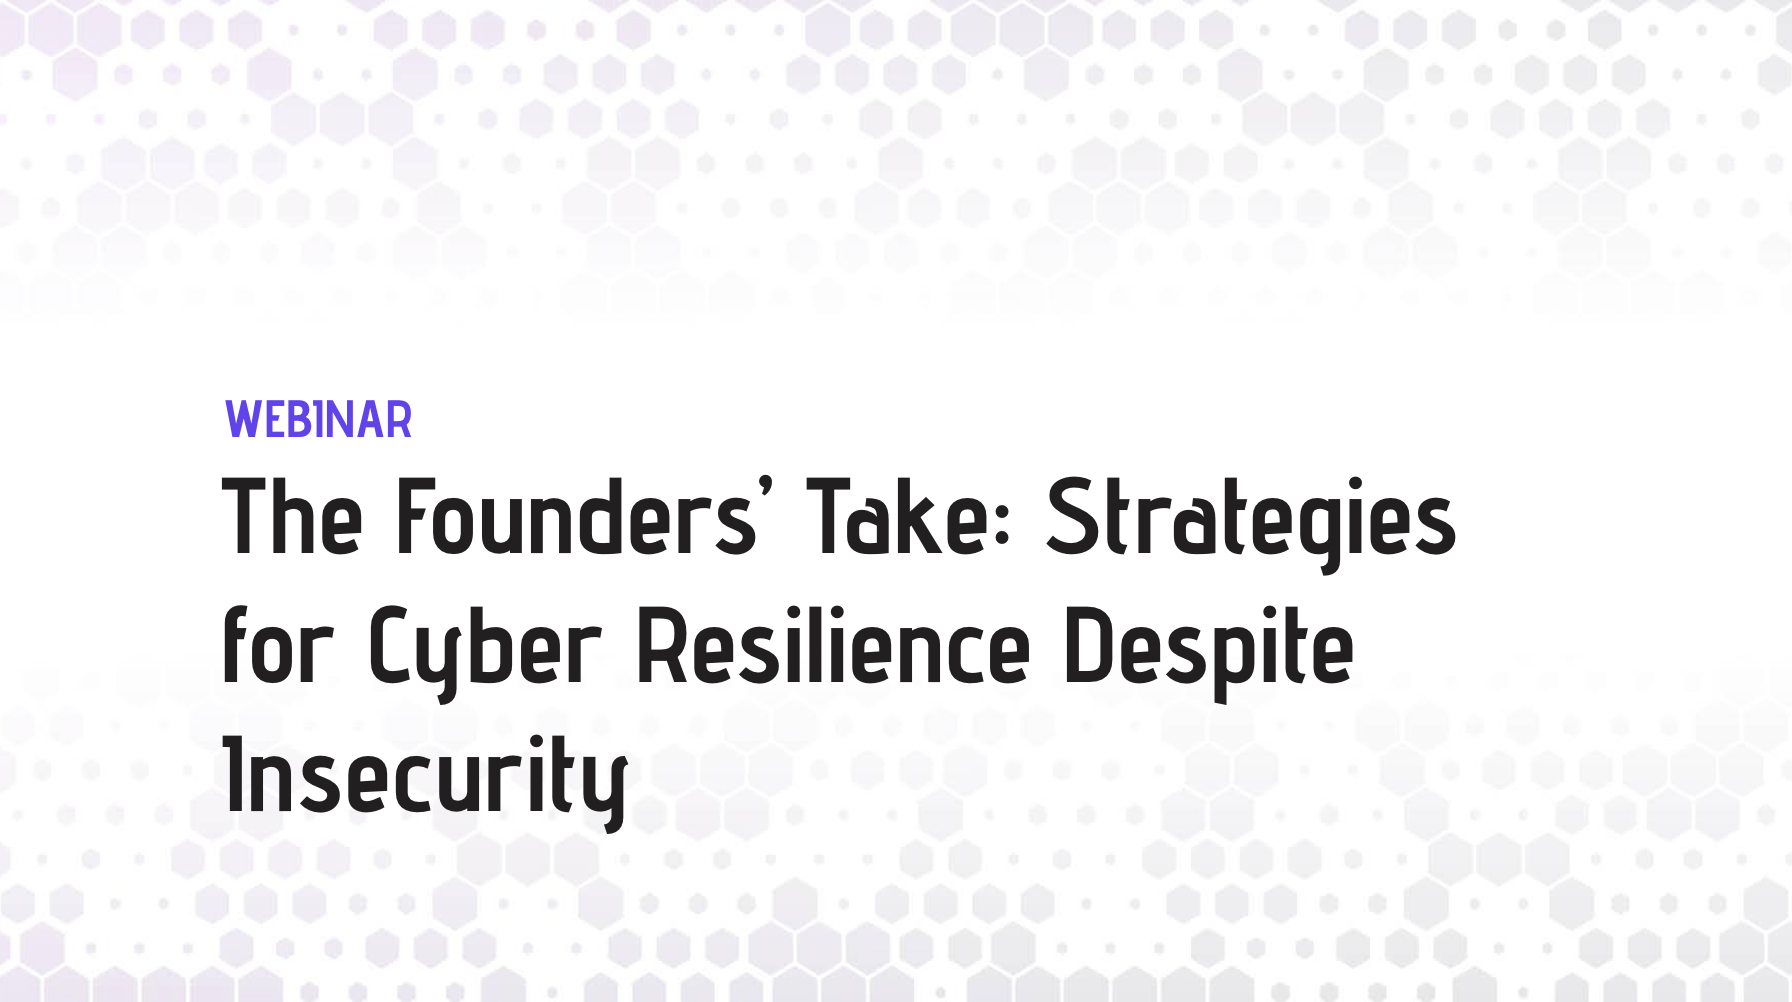 The Founders’ Take: Strategies for Cyber Resilience Despite Insecurity